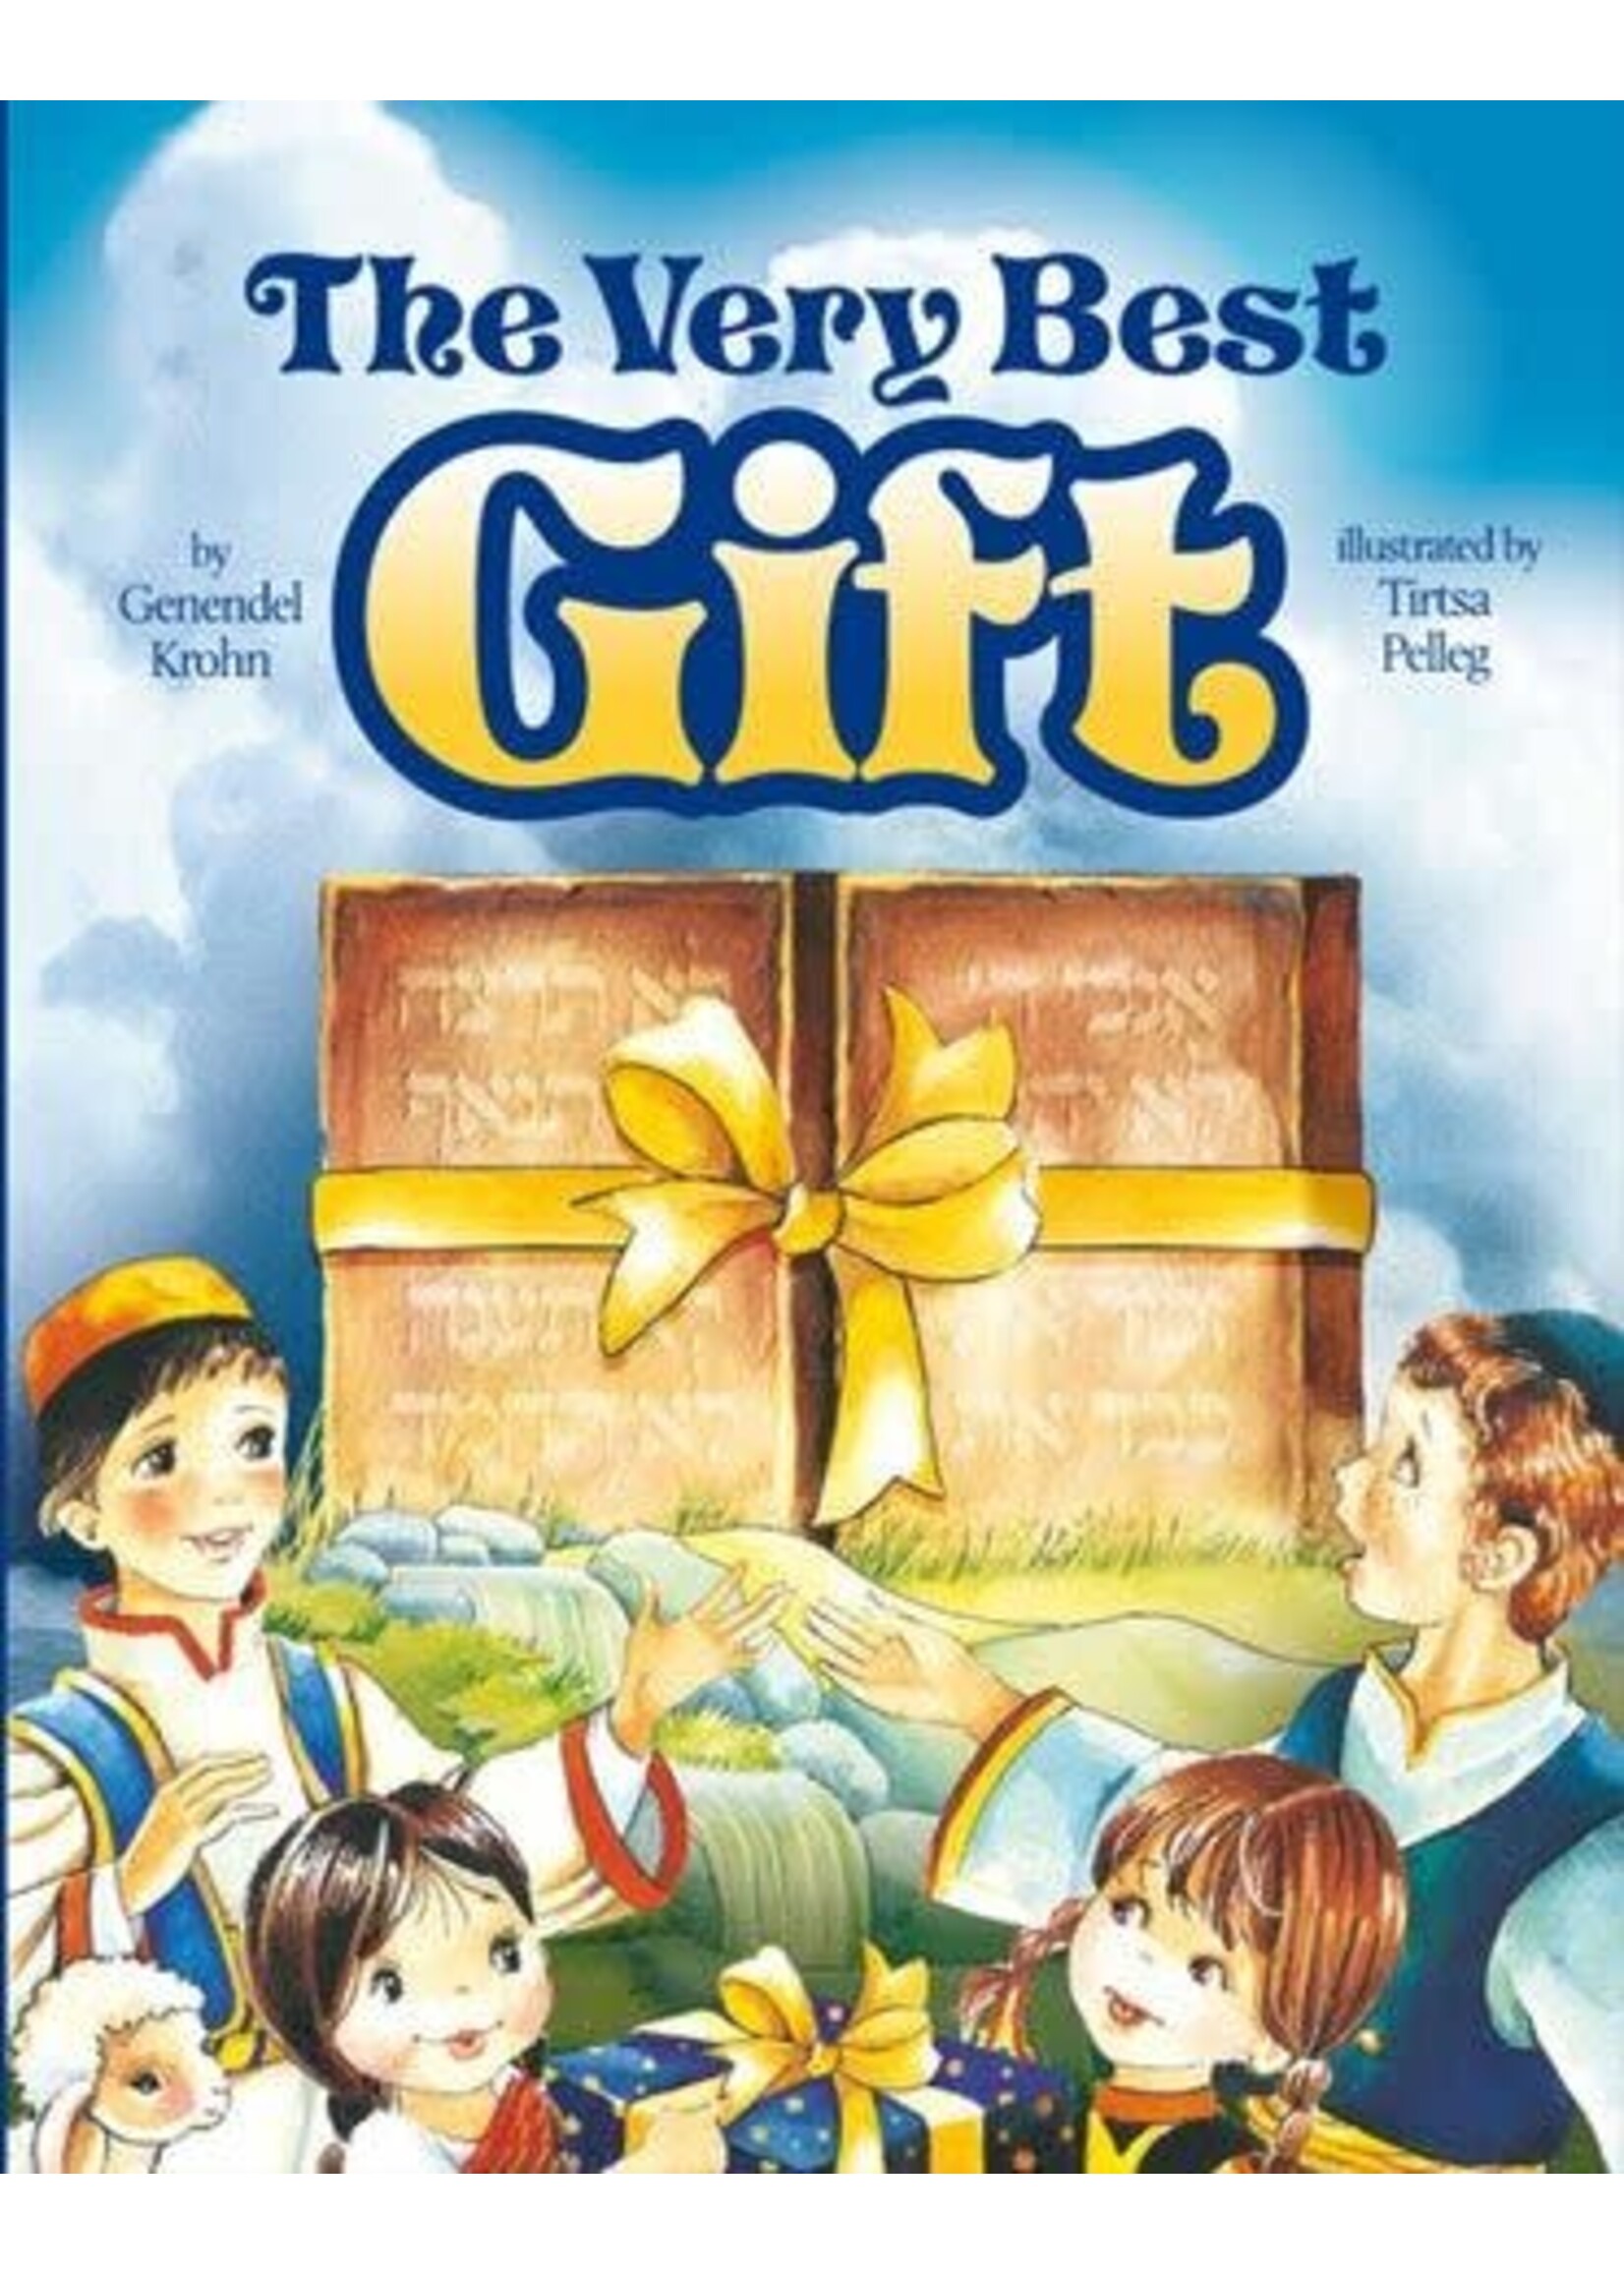 THE VERY BEST GIFT